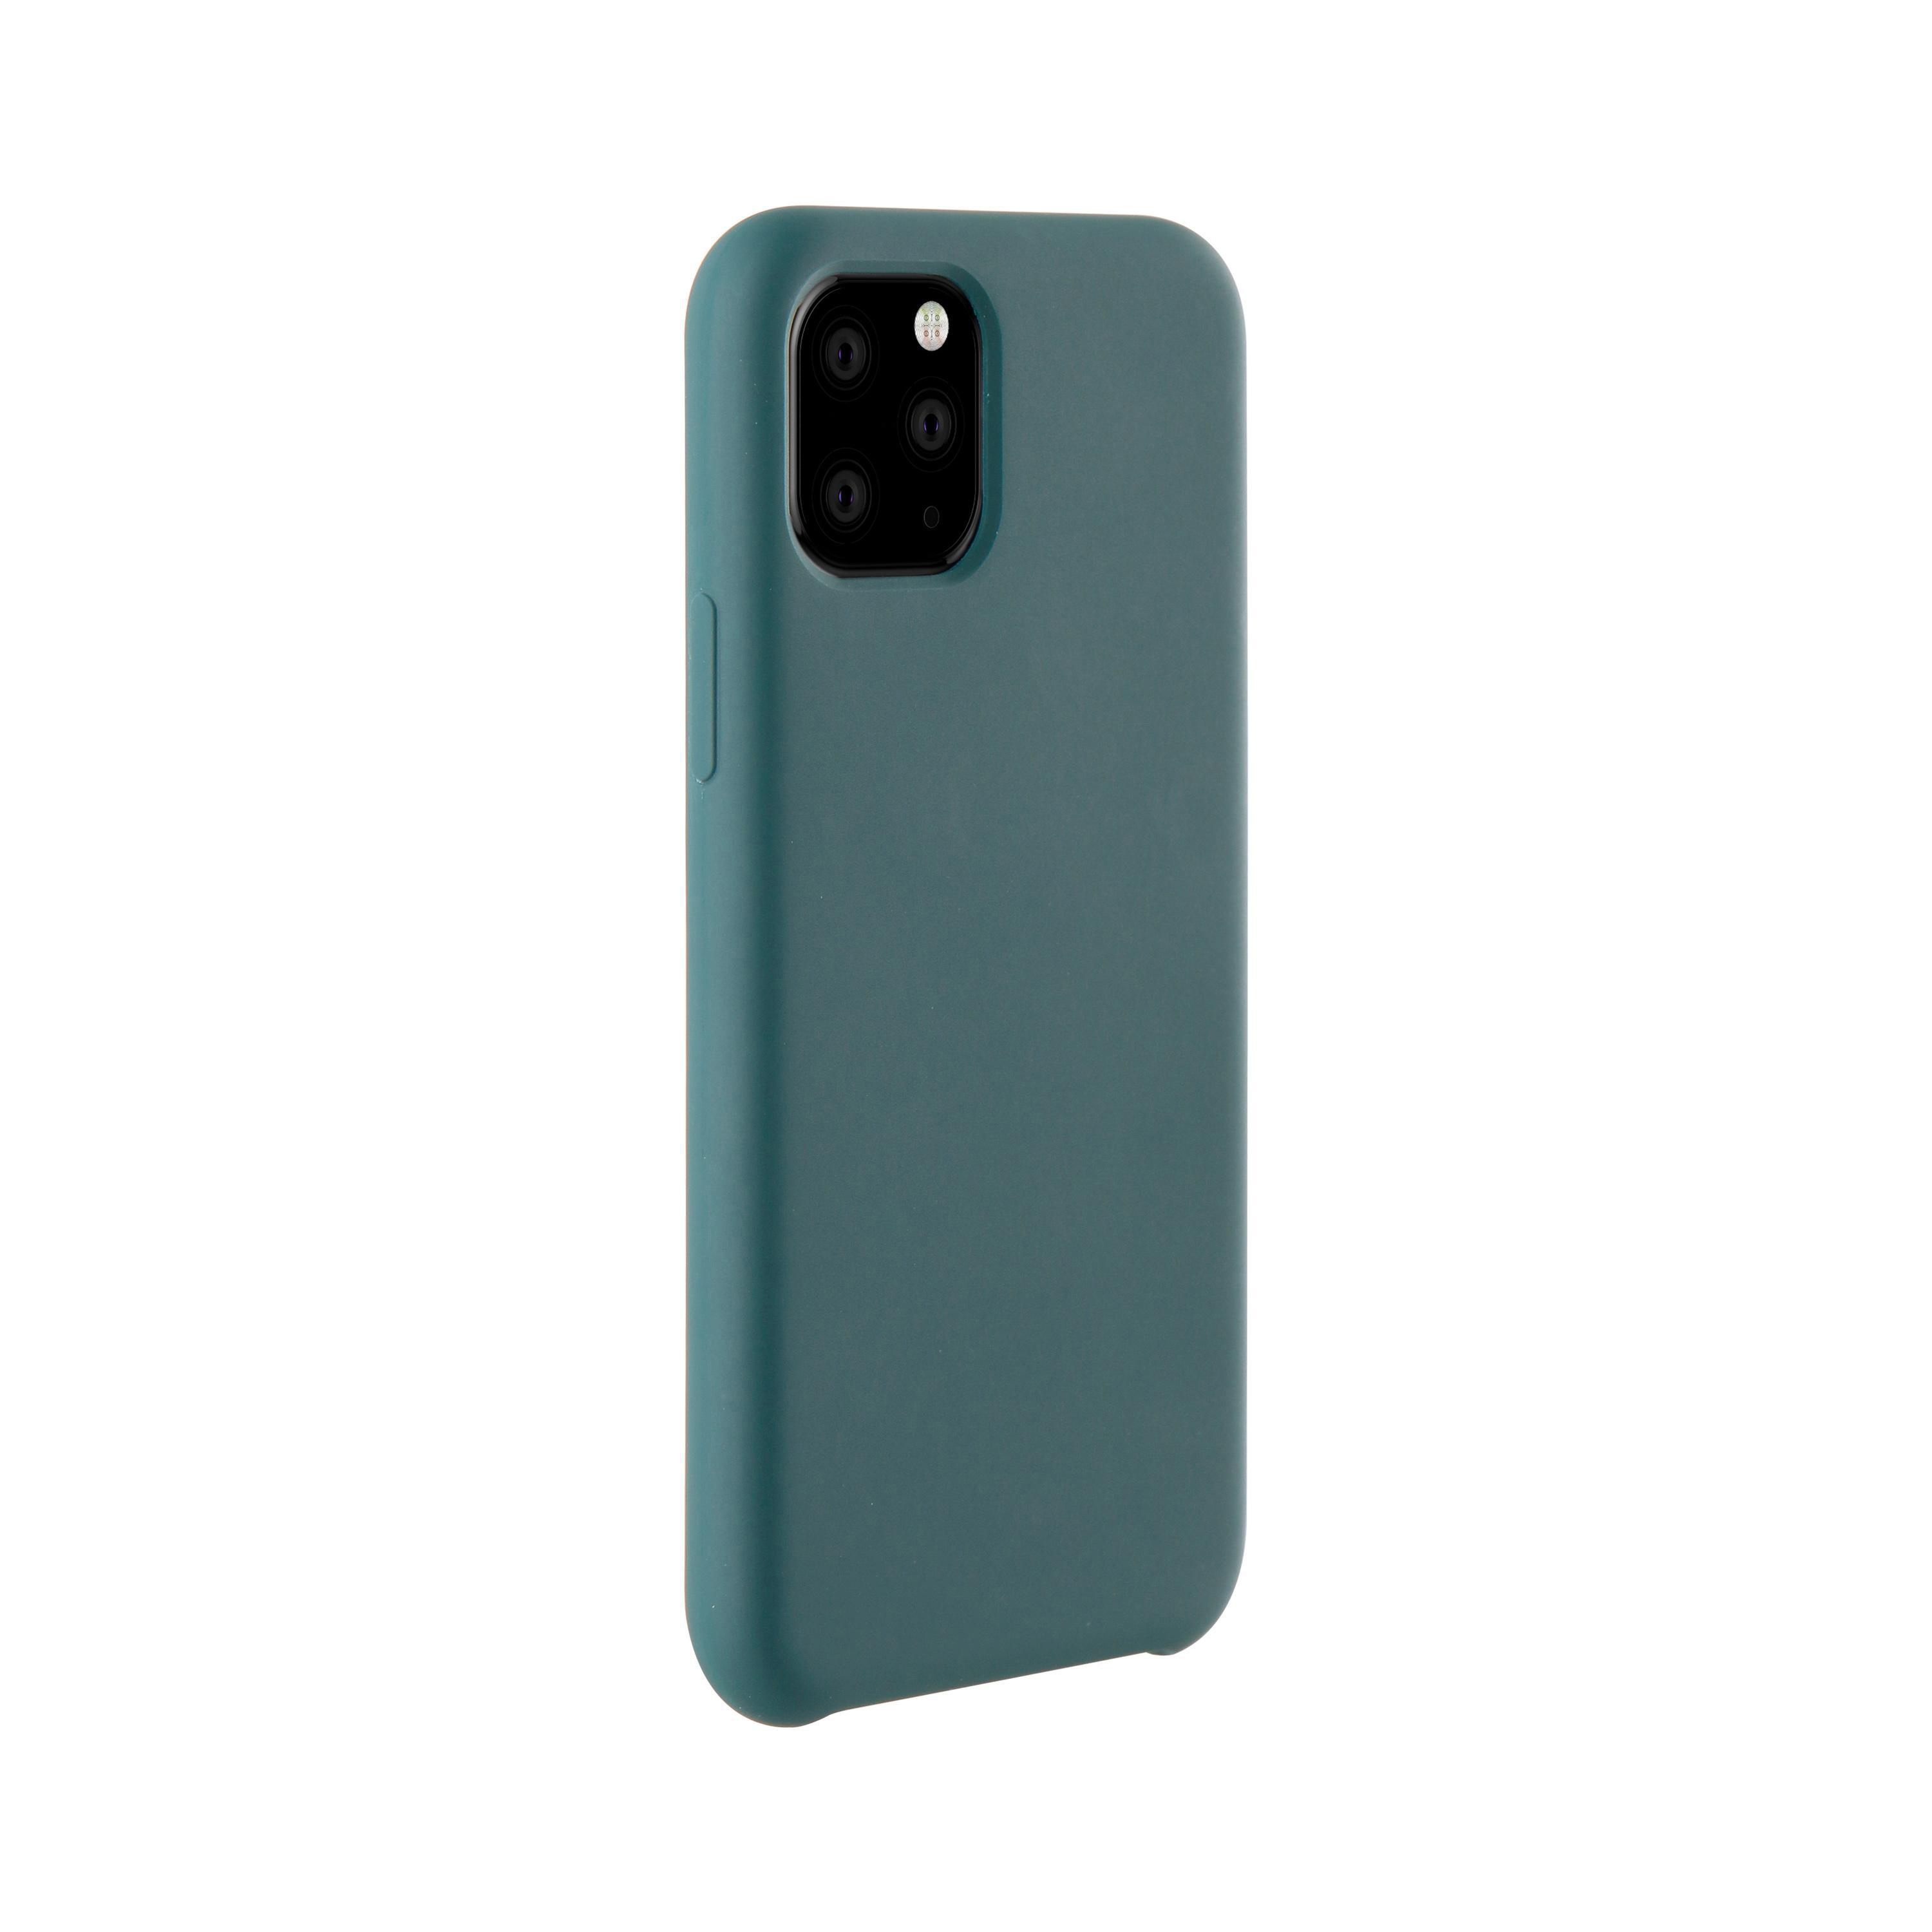 iPhone Midnight Apple, Hype green Cover, Backcover, VIVANCO Pro, 11